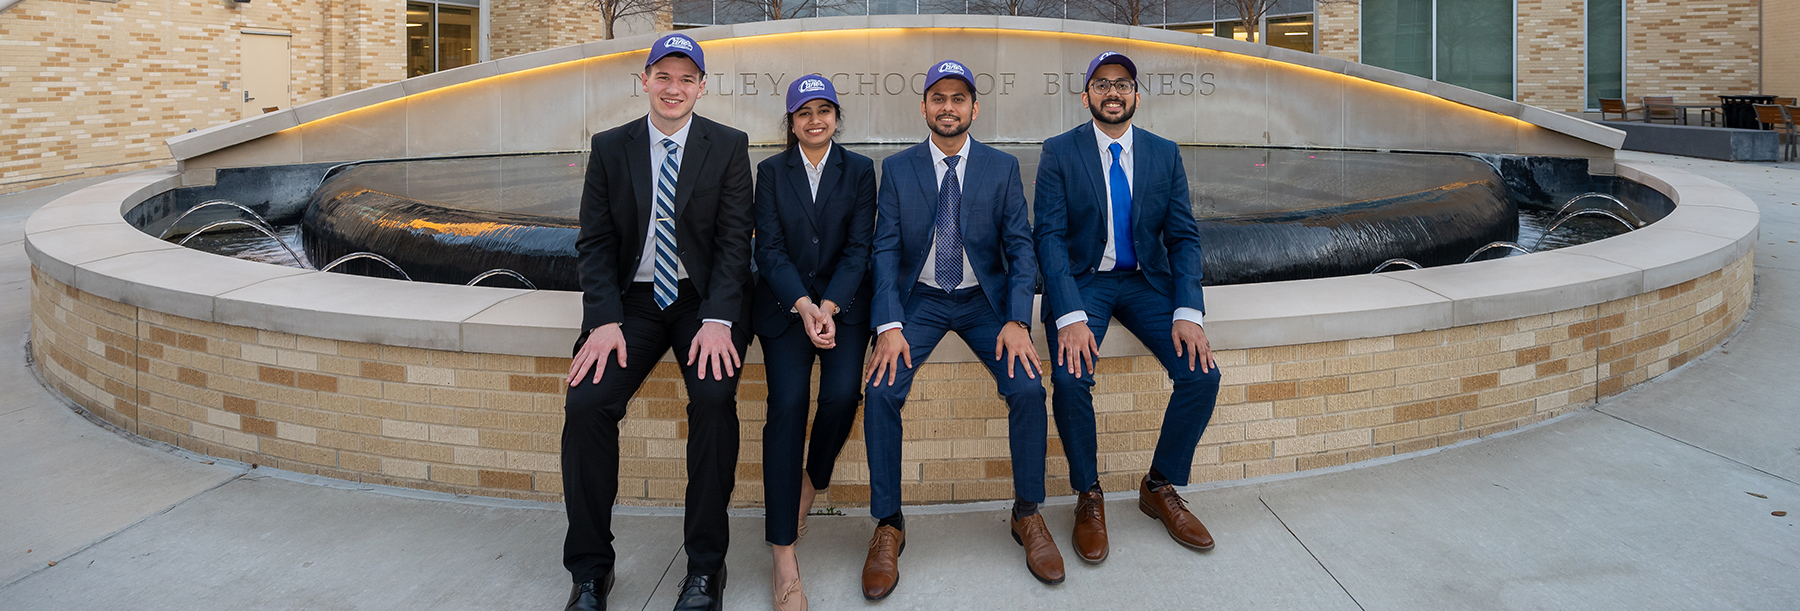 Section Image: University of Wisconsin team of Tobias Kern, Sajal Dixit, Saurabh Papppu and Juhi Goenka at the Neeley fountain wearing purple competition baseball hats 